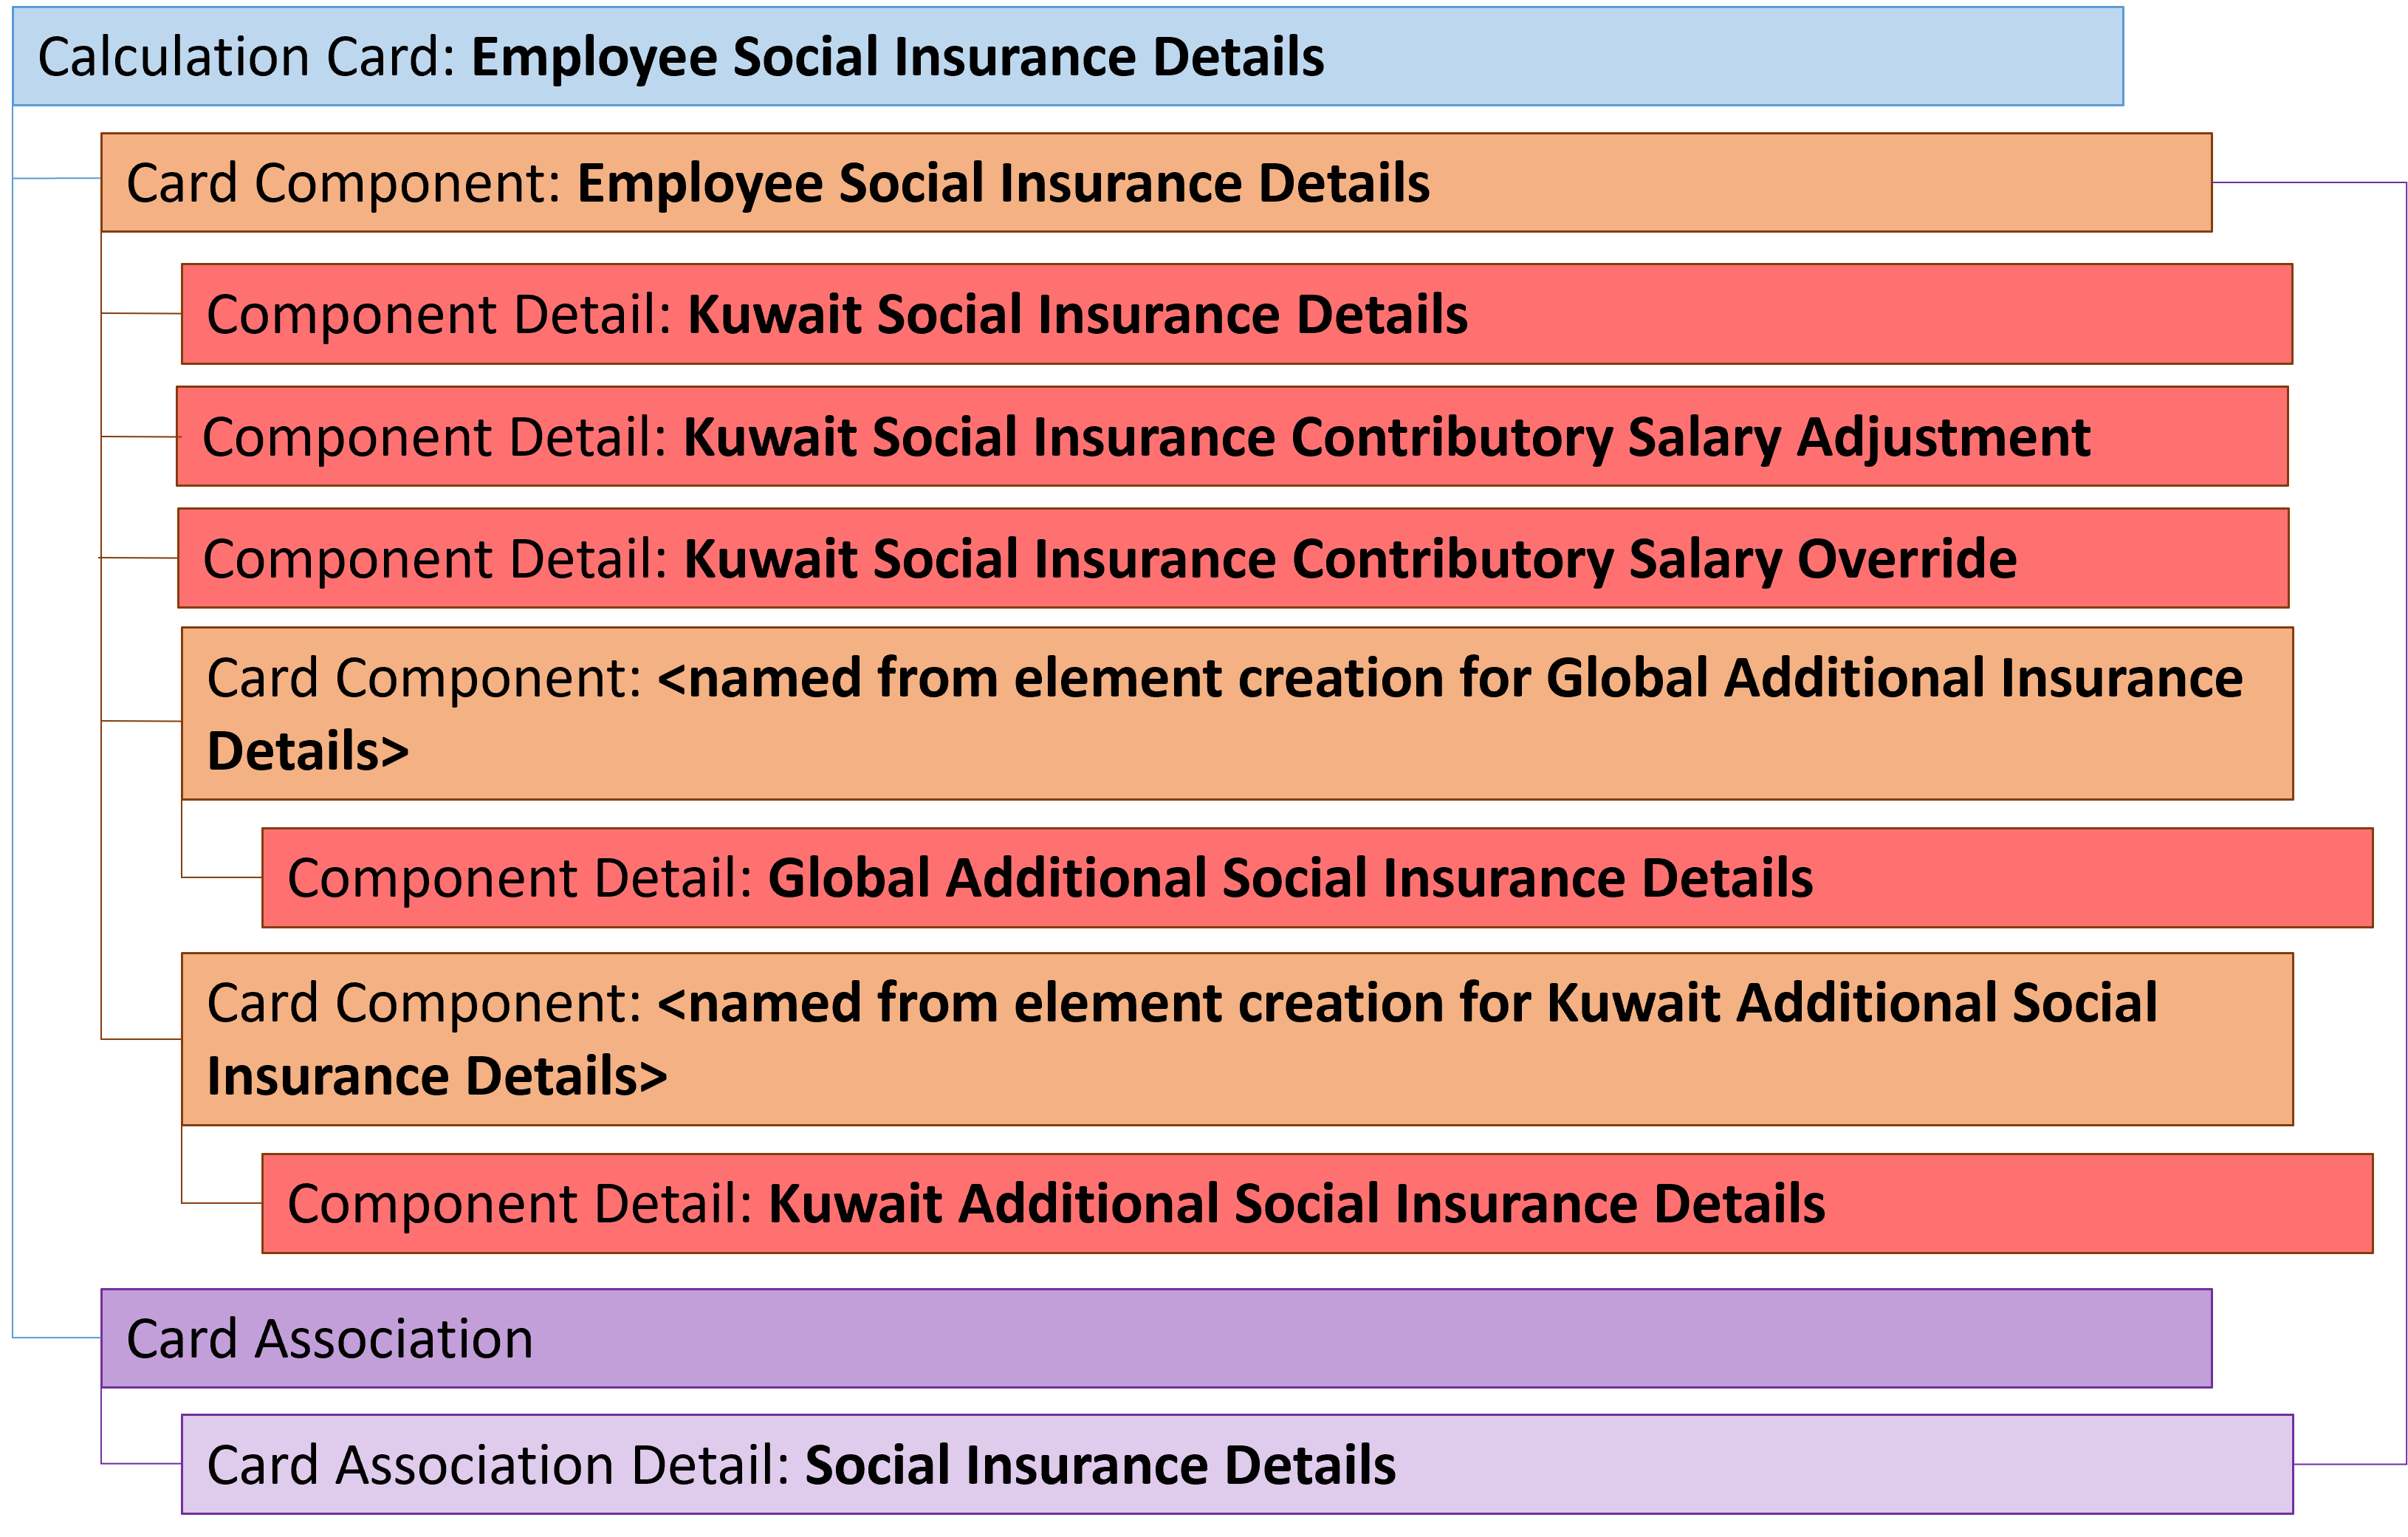 kw employee social insurance details card hierarchy